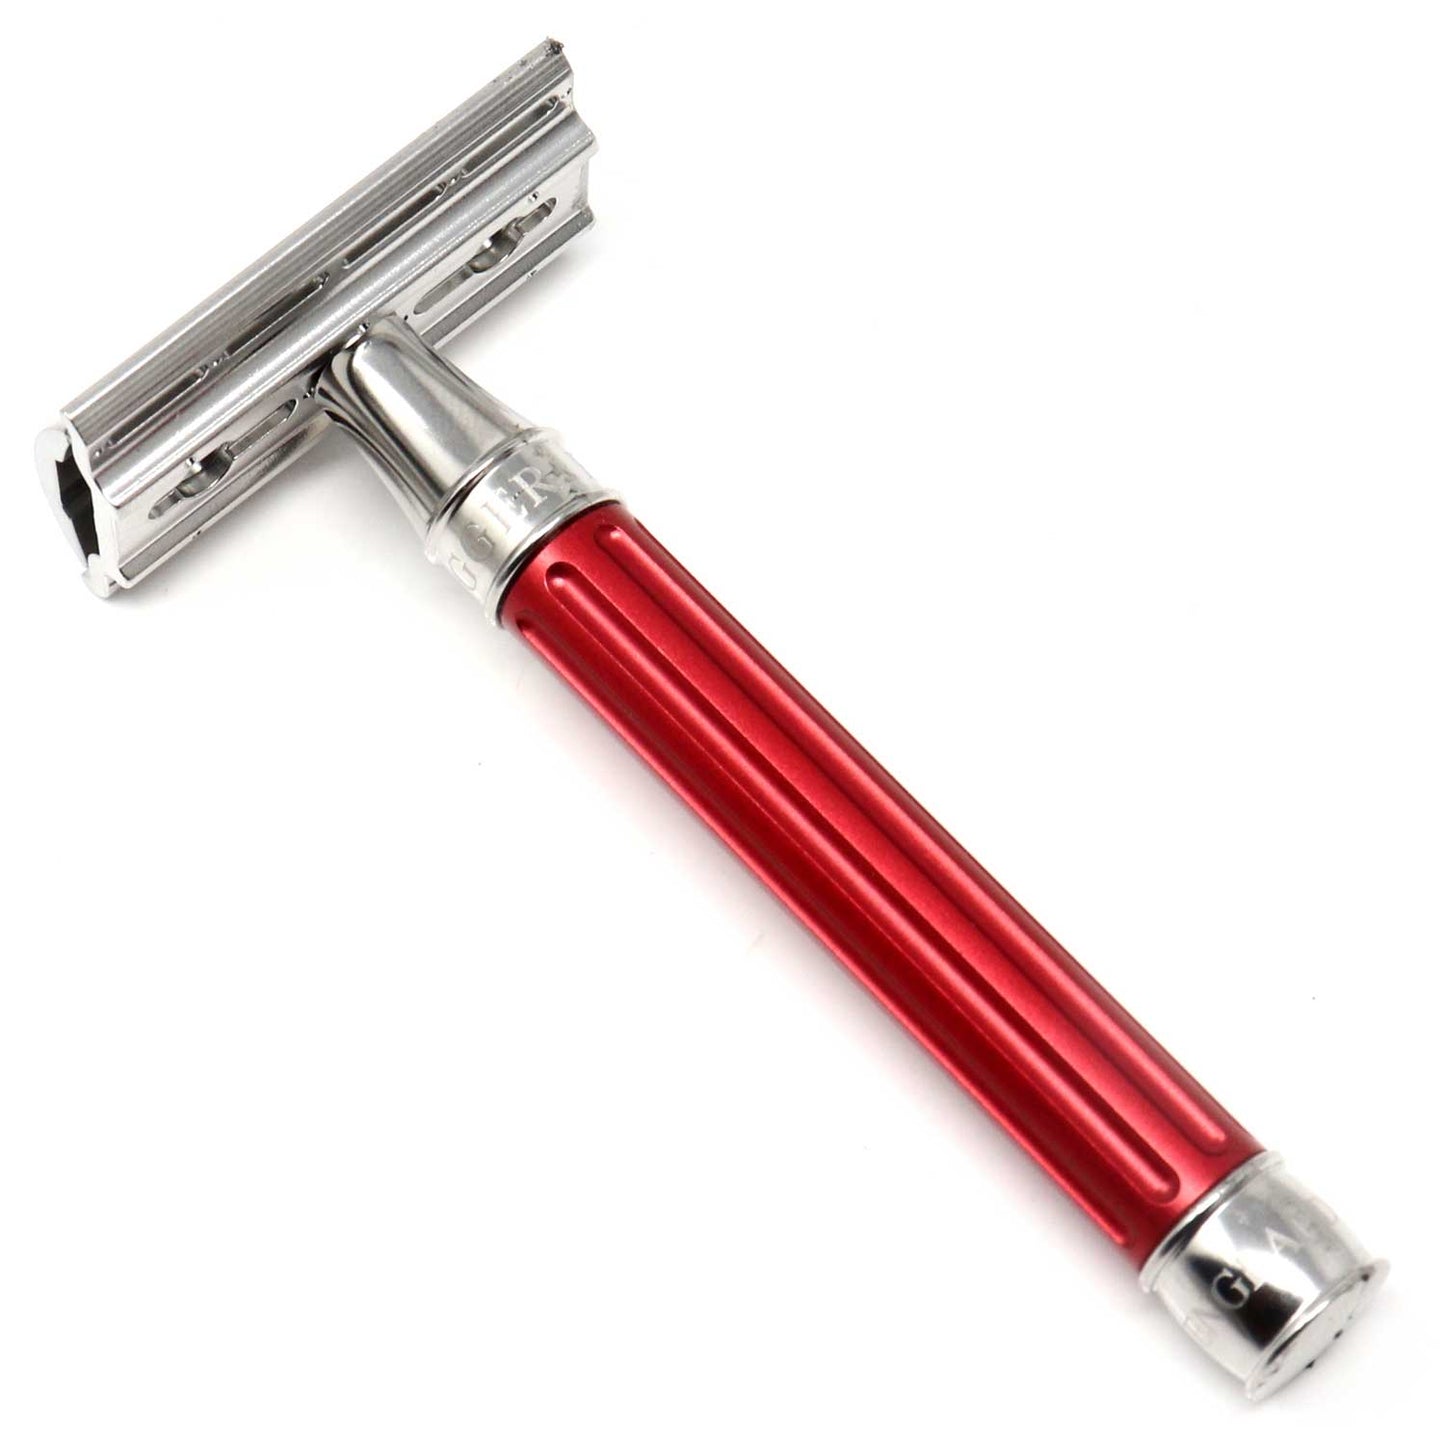 Edwin Jagger 3ONE6 DE Stainless Steel Safety Razor, Grooved, Anodised Red, 1x Pack of Feather Razor